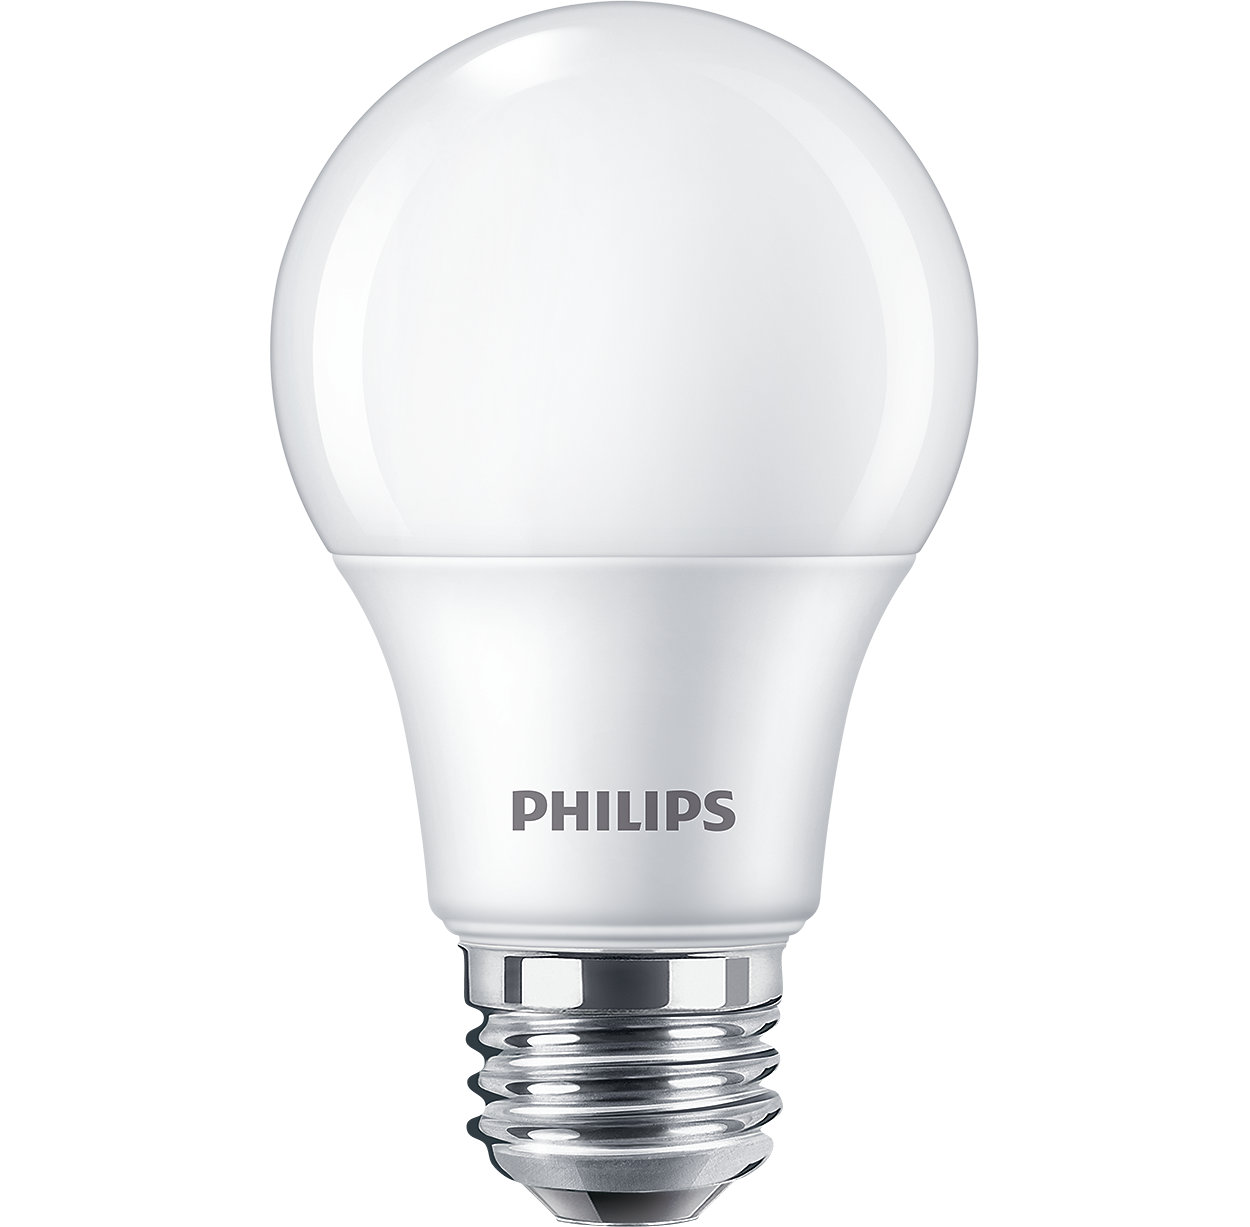 Attractive LED alternative to popular incandescents.